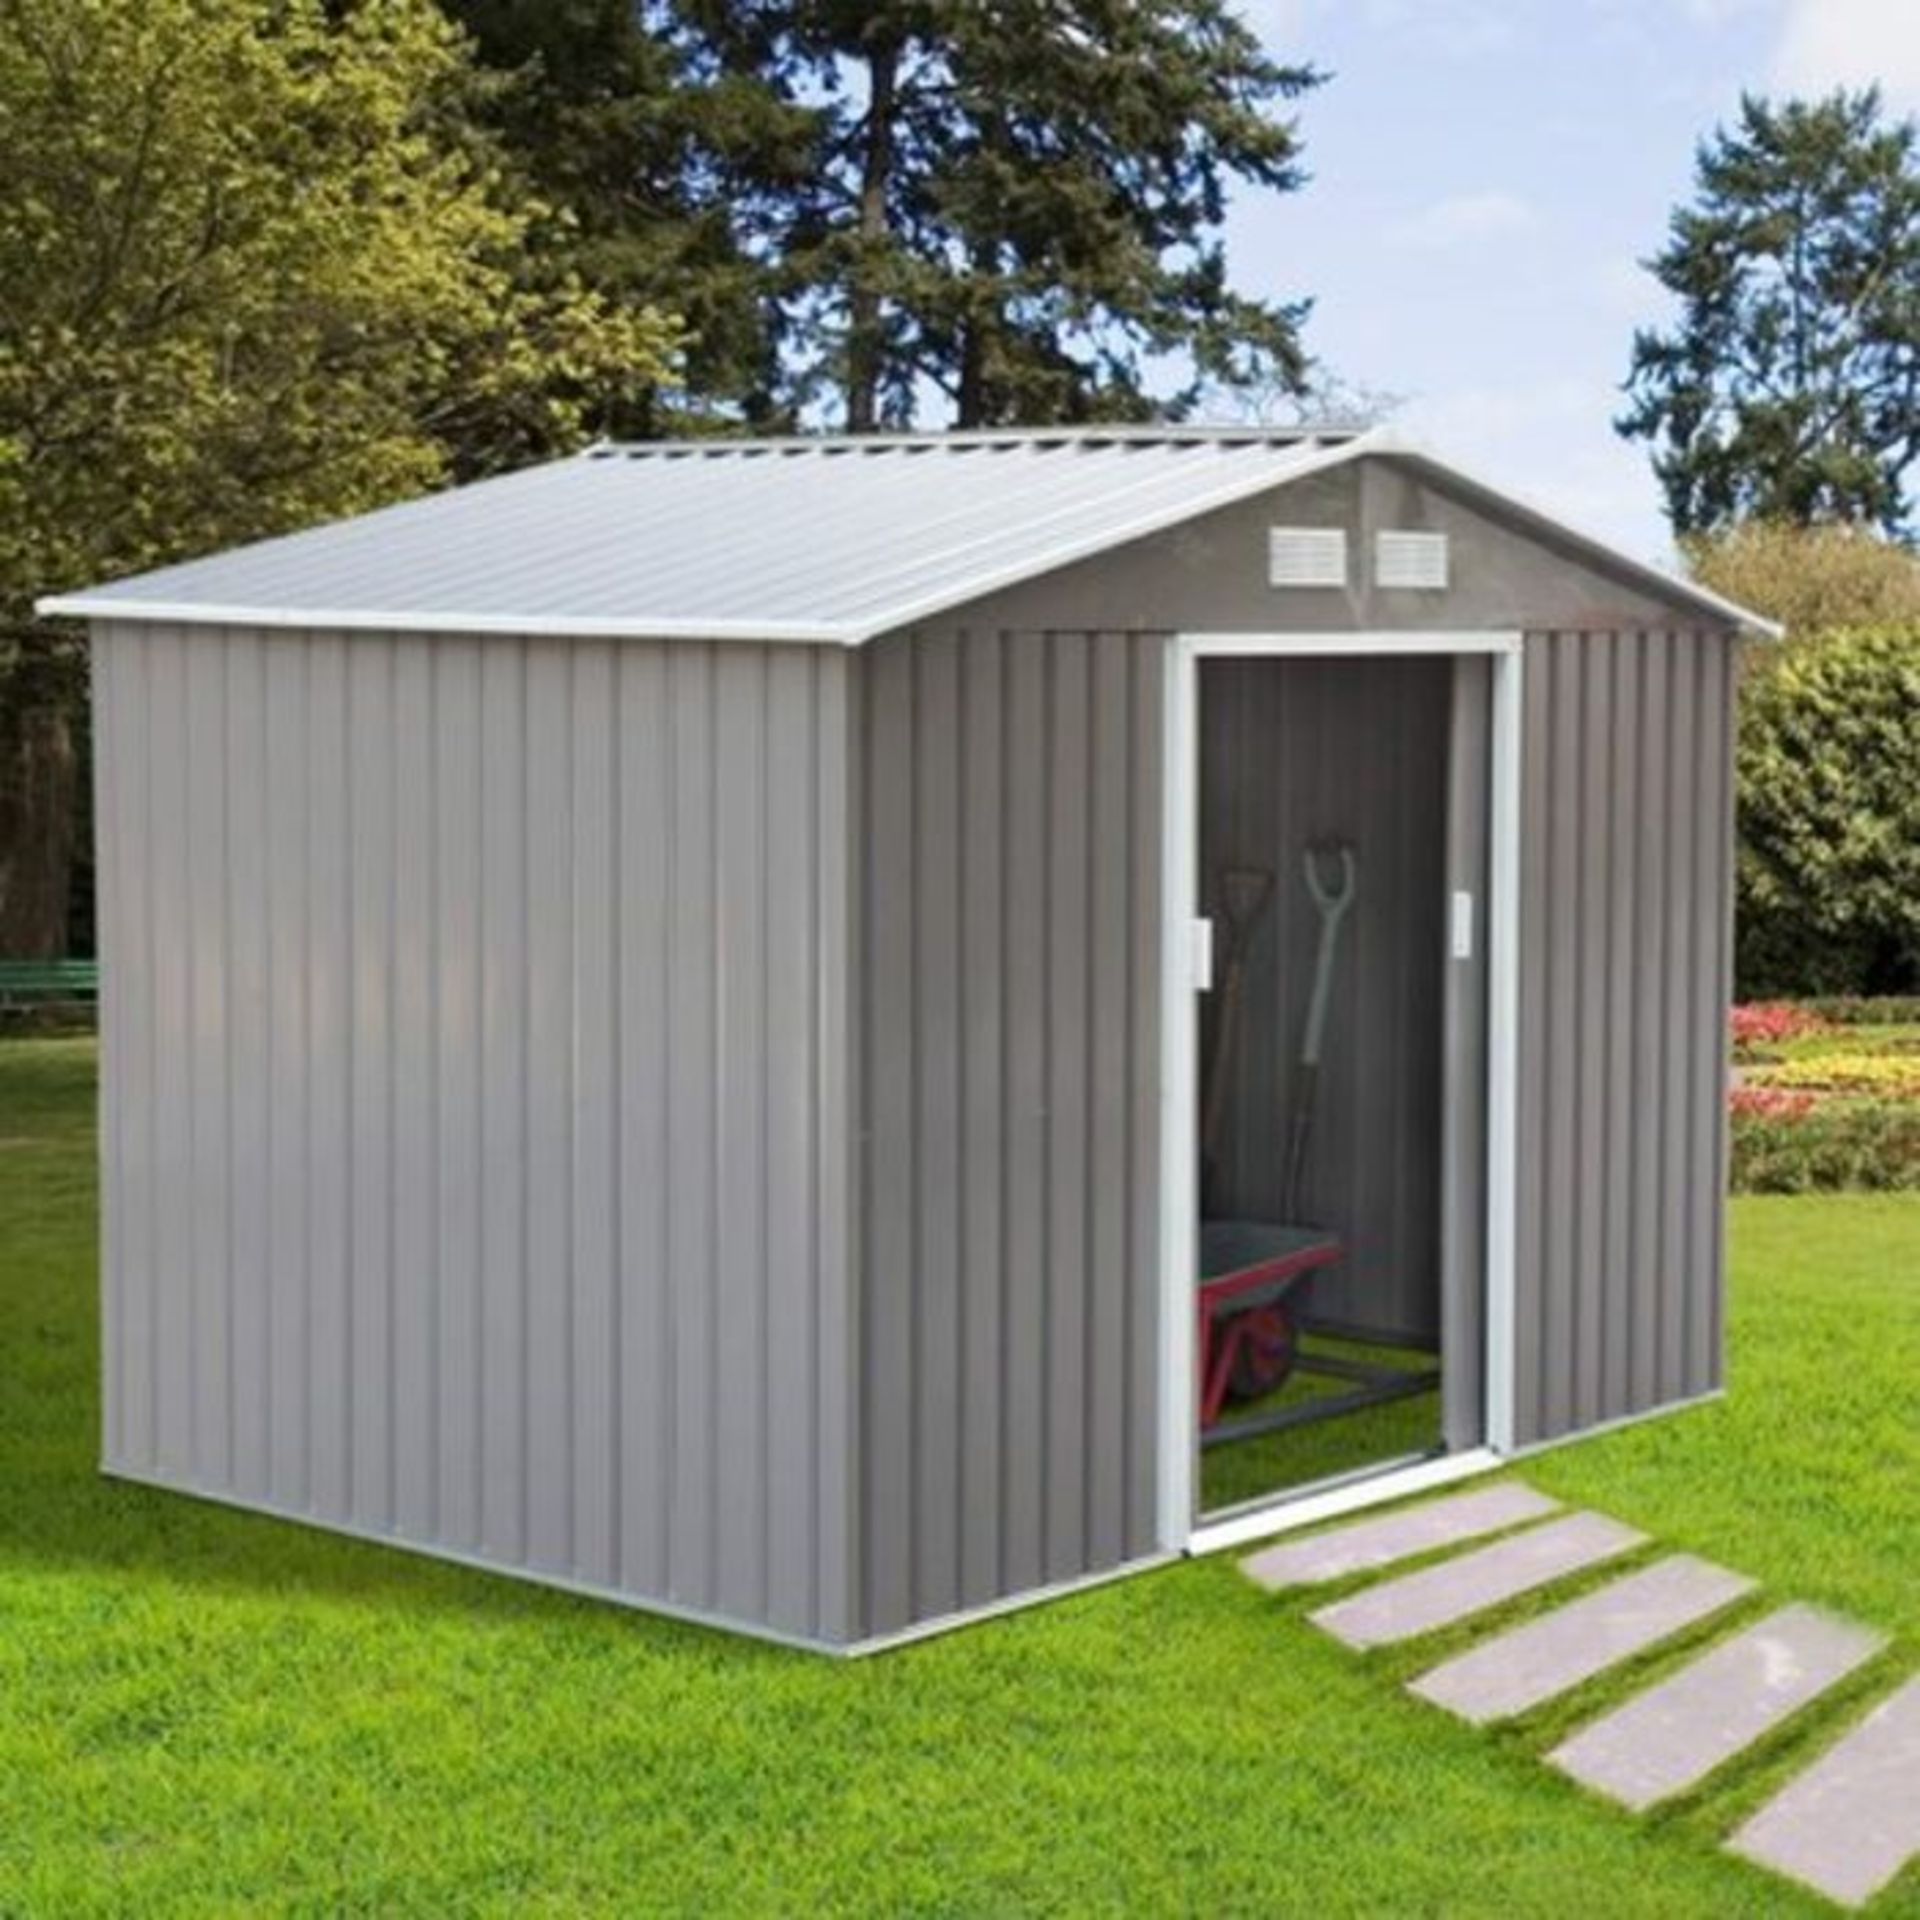 WFX Utility,6 ft. W x 9 ft. D Apex Metal Shed RRP -£359.99 (26806/12 -GCQQ1471)3X BOXES(BOXED,